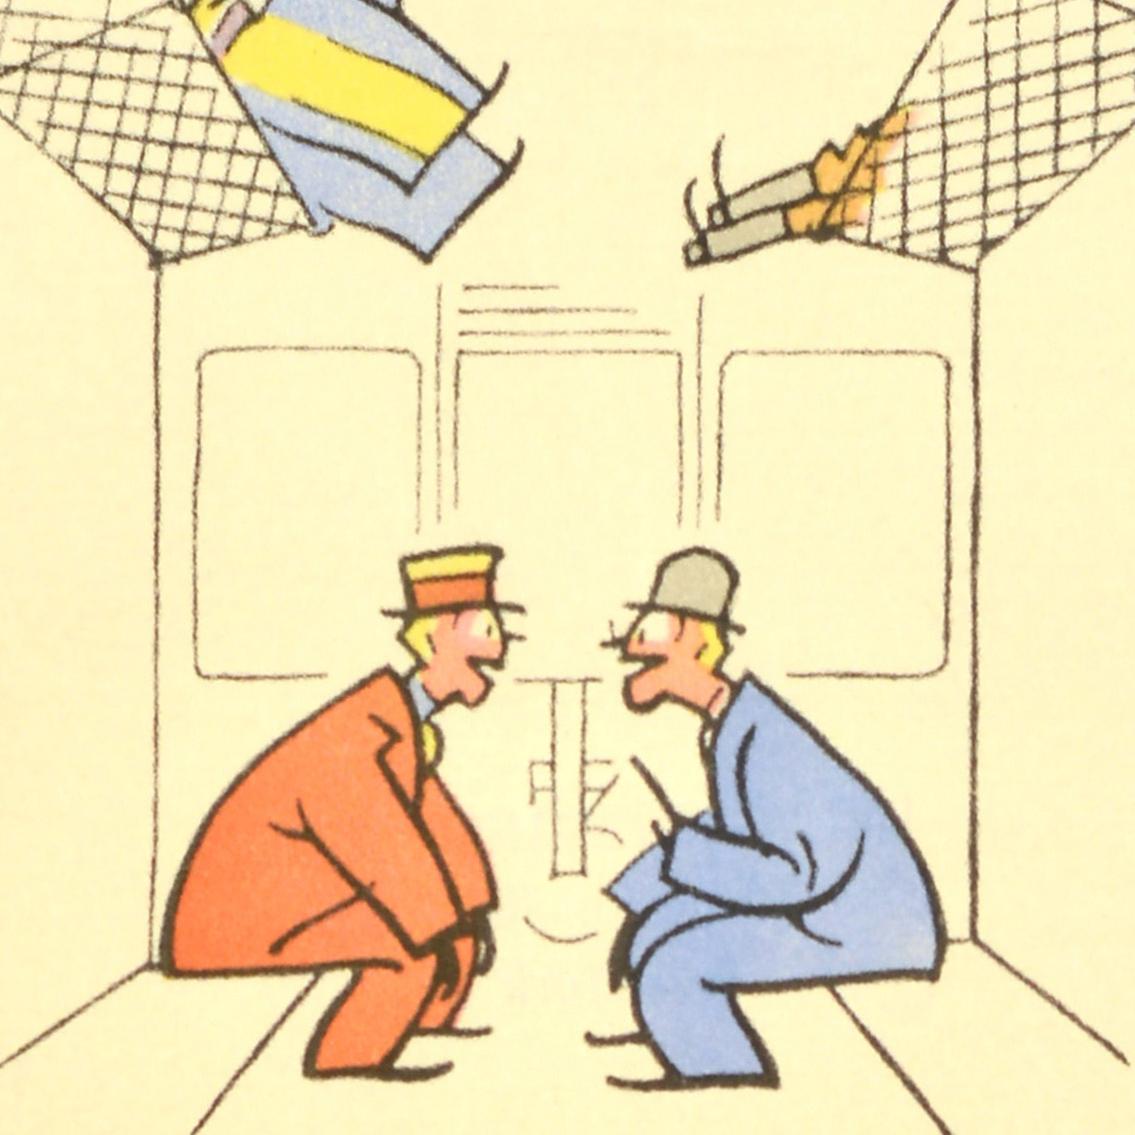 Original Vintage War Poster Careless Talk Costs Lives Go Any Further WWII Train - Print by Fougasse (Cyril Kenneth Bird)